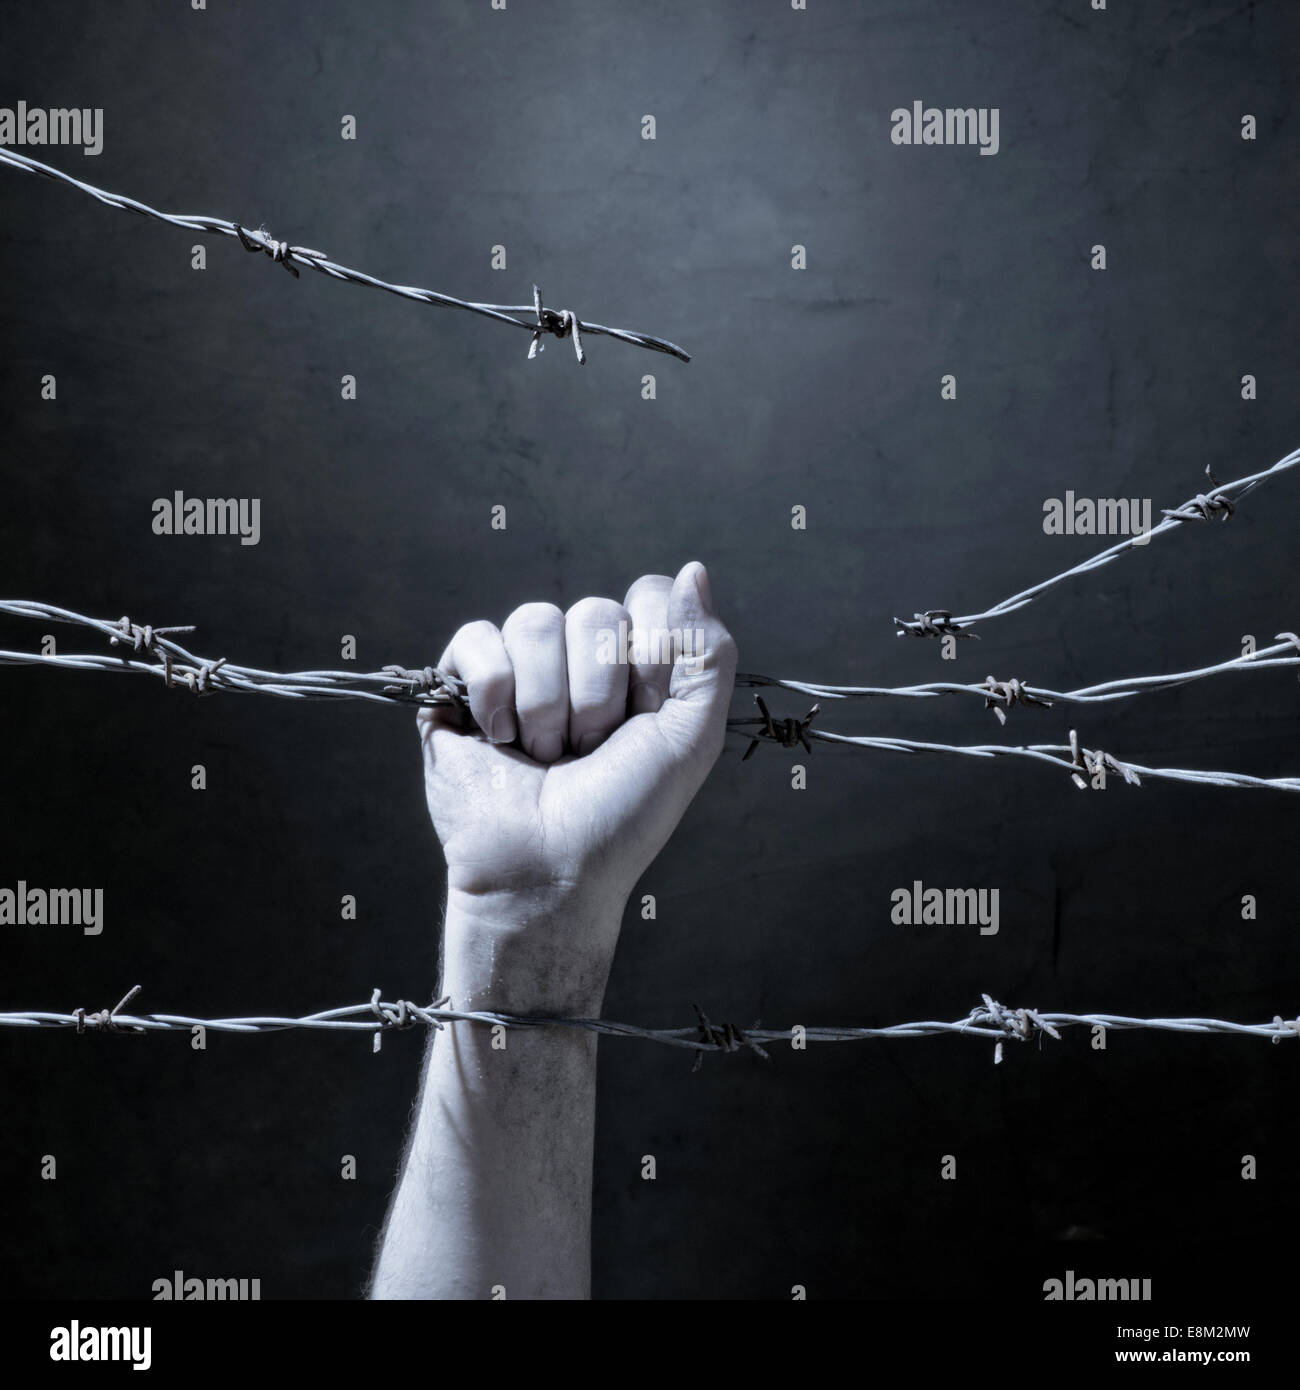 hand behind barbed wire with dark background Stock Photo